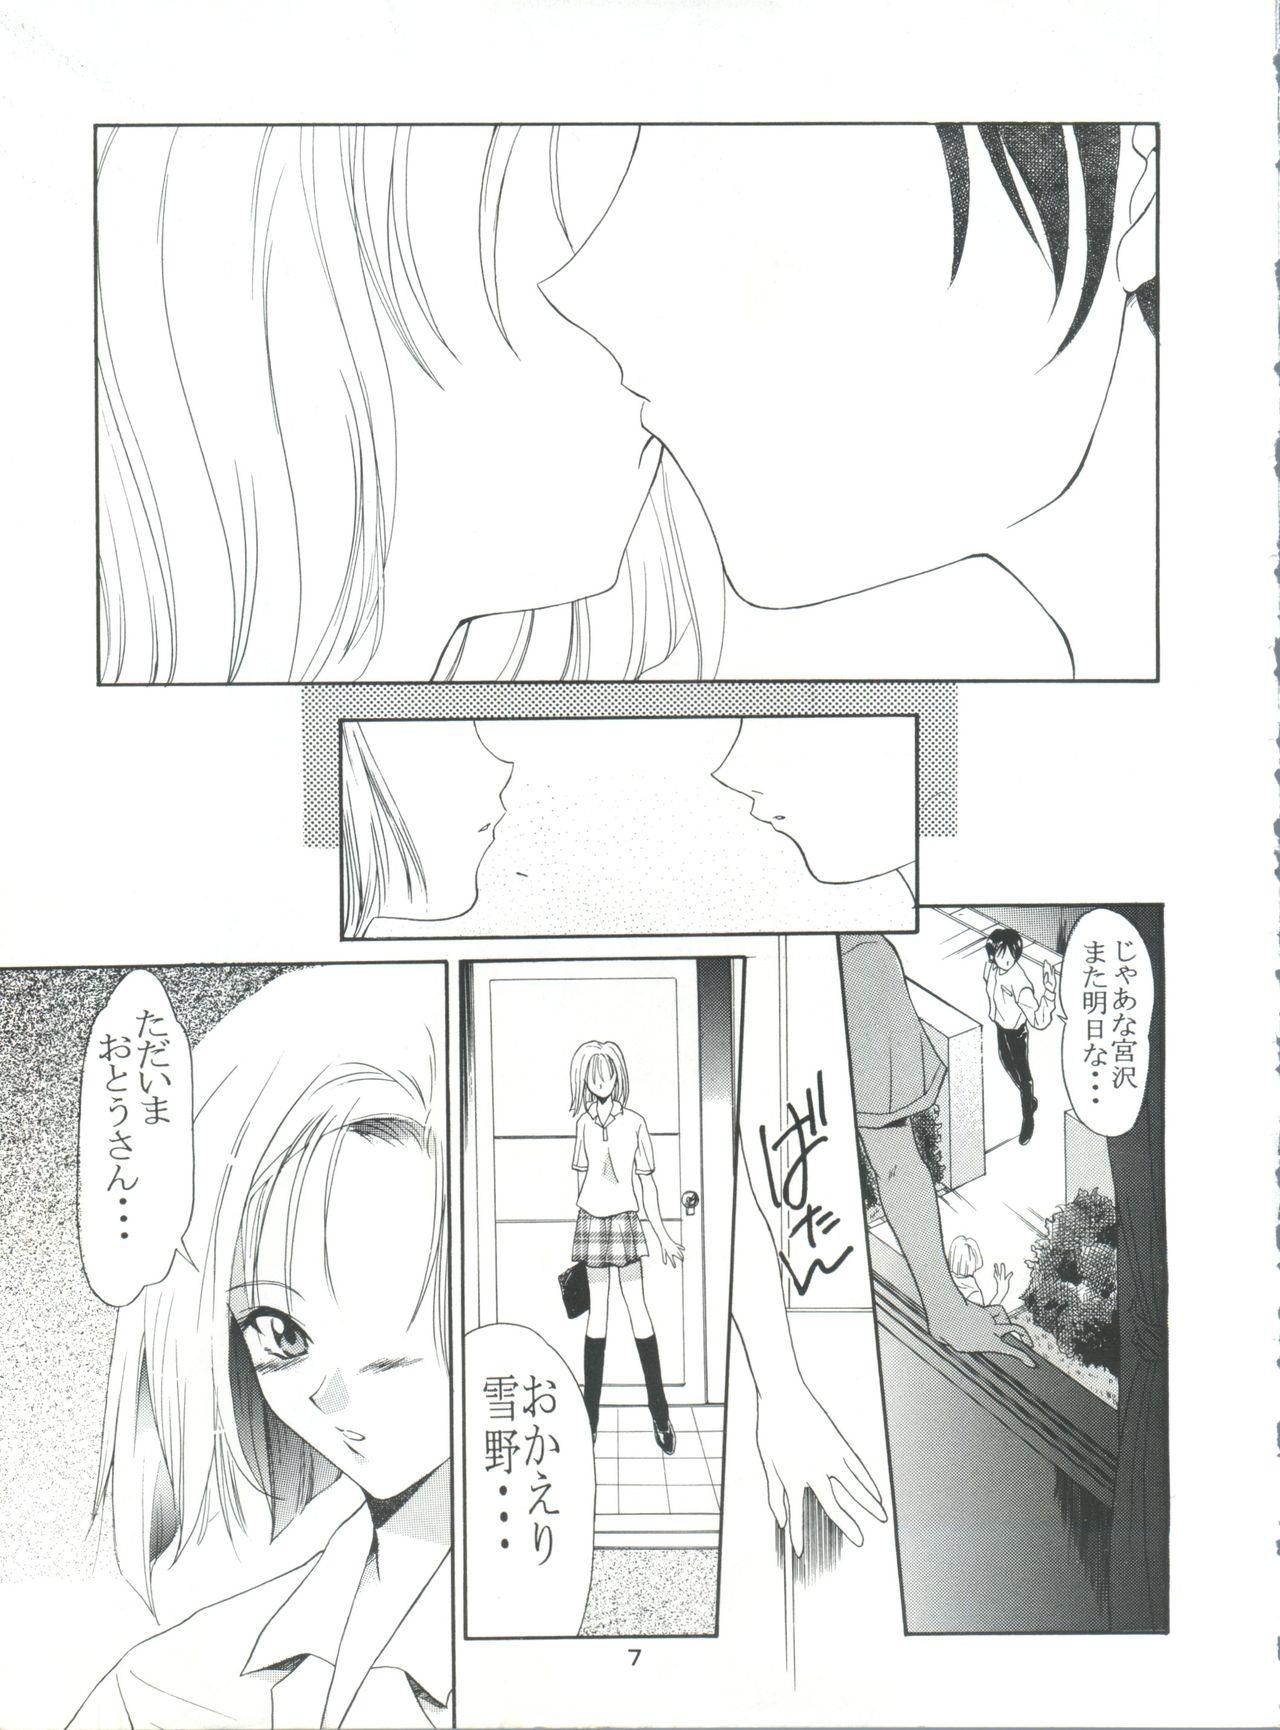 Vibrator Boys and Girls - White album Kare kano Missionary - Page 7